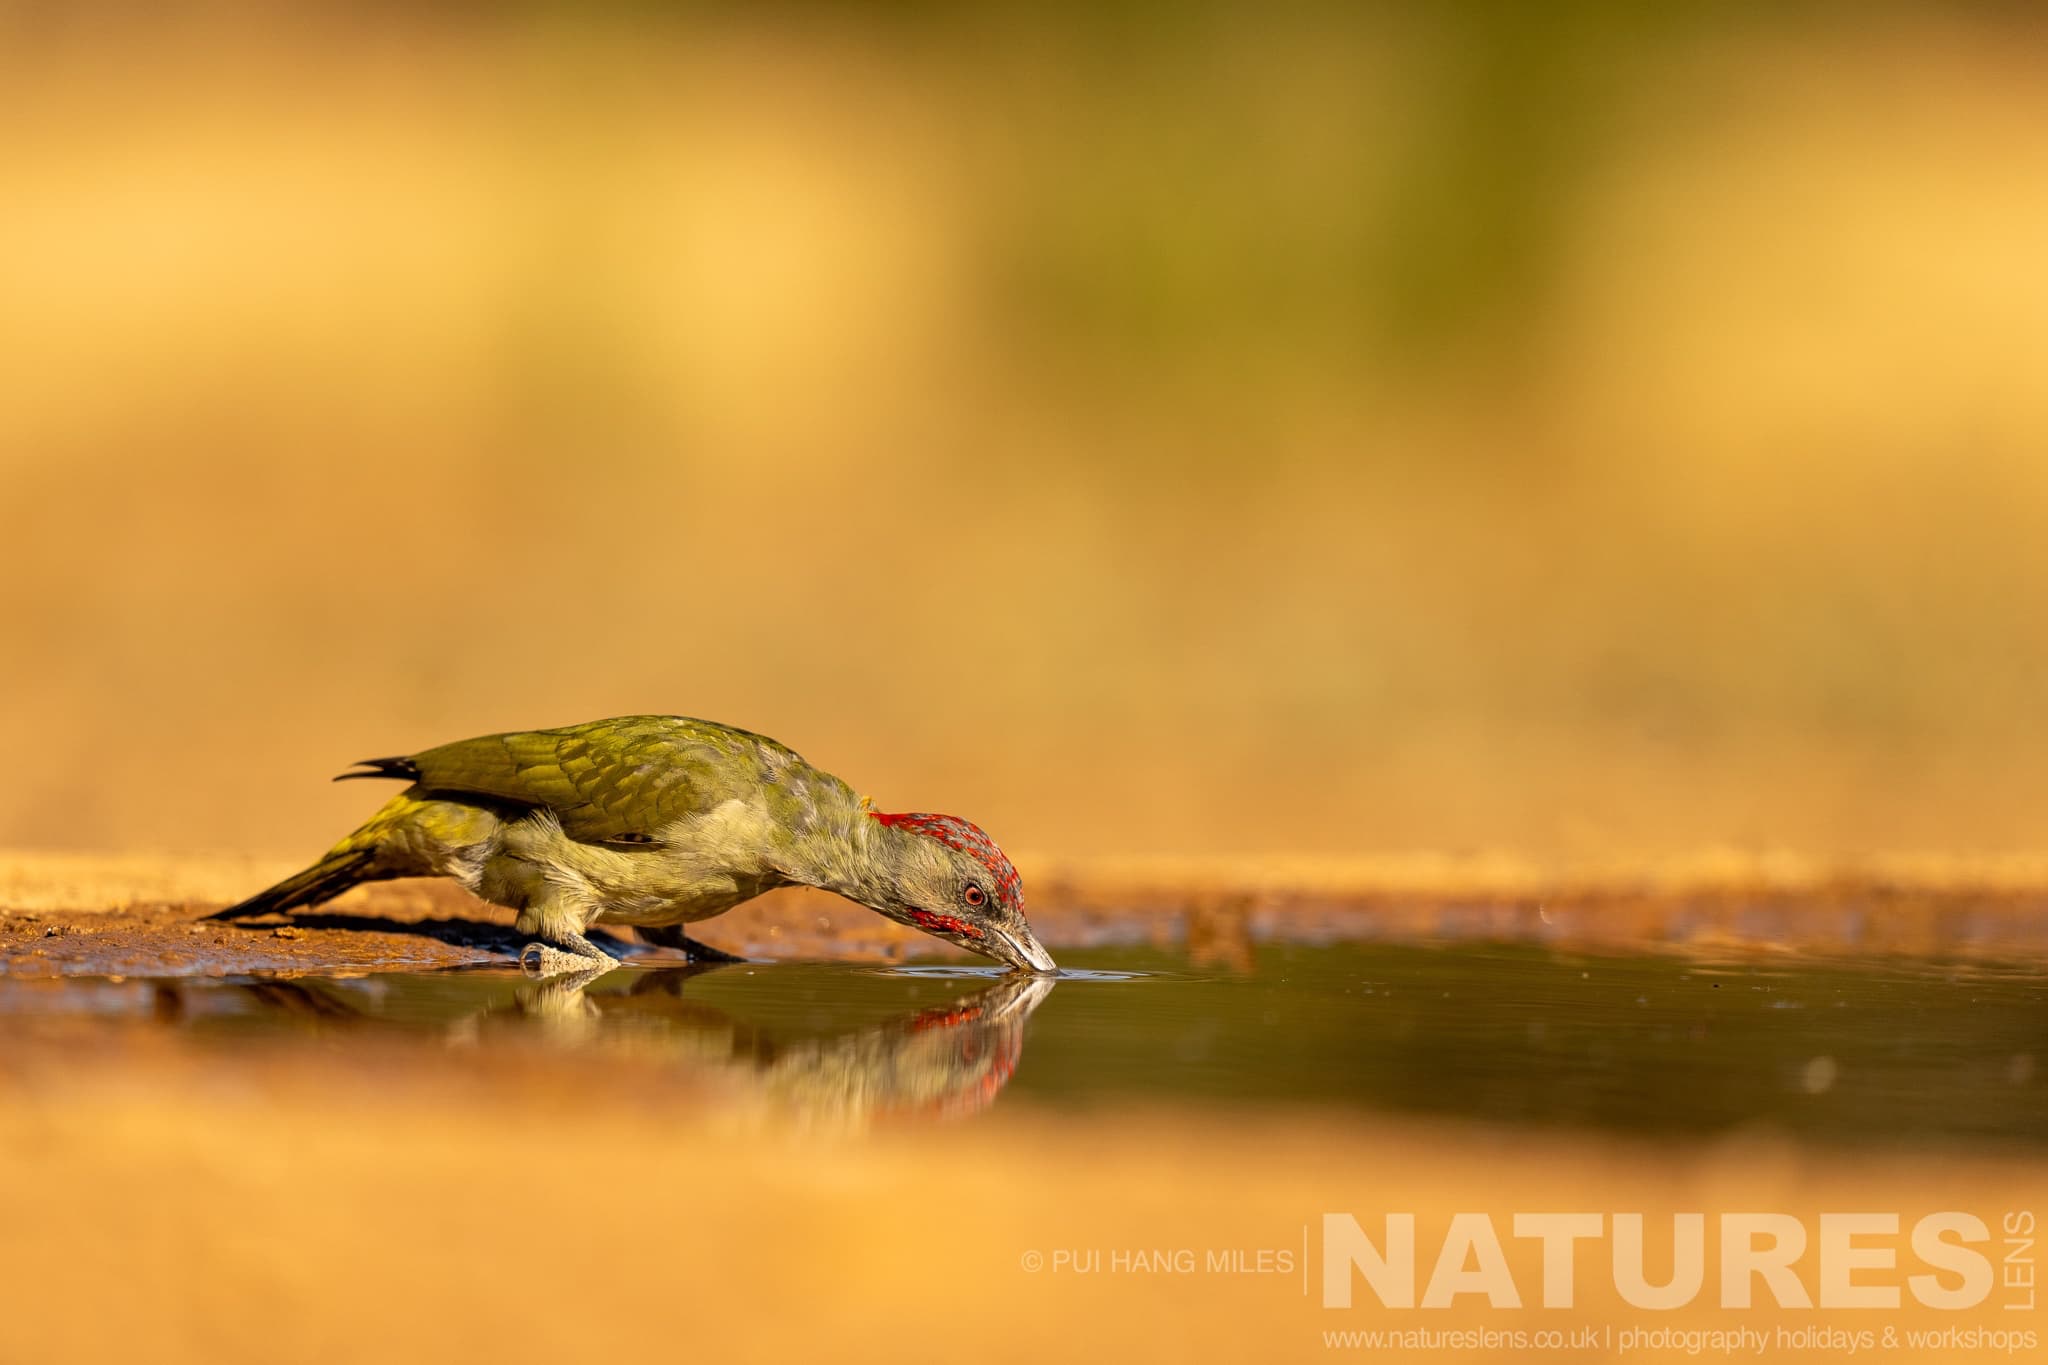 A Drinking Woodpecker Photographed During One Of The Natureslens Lynx Photography Scouting Trips